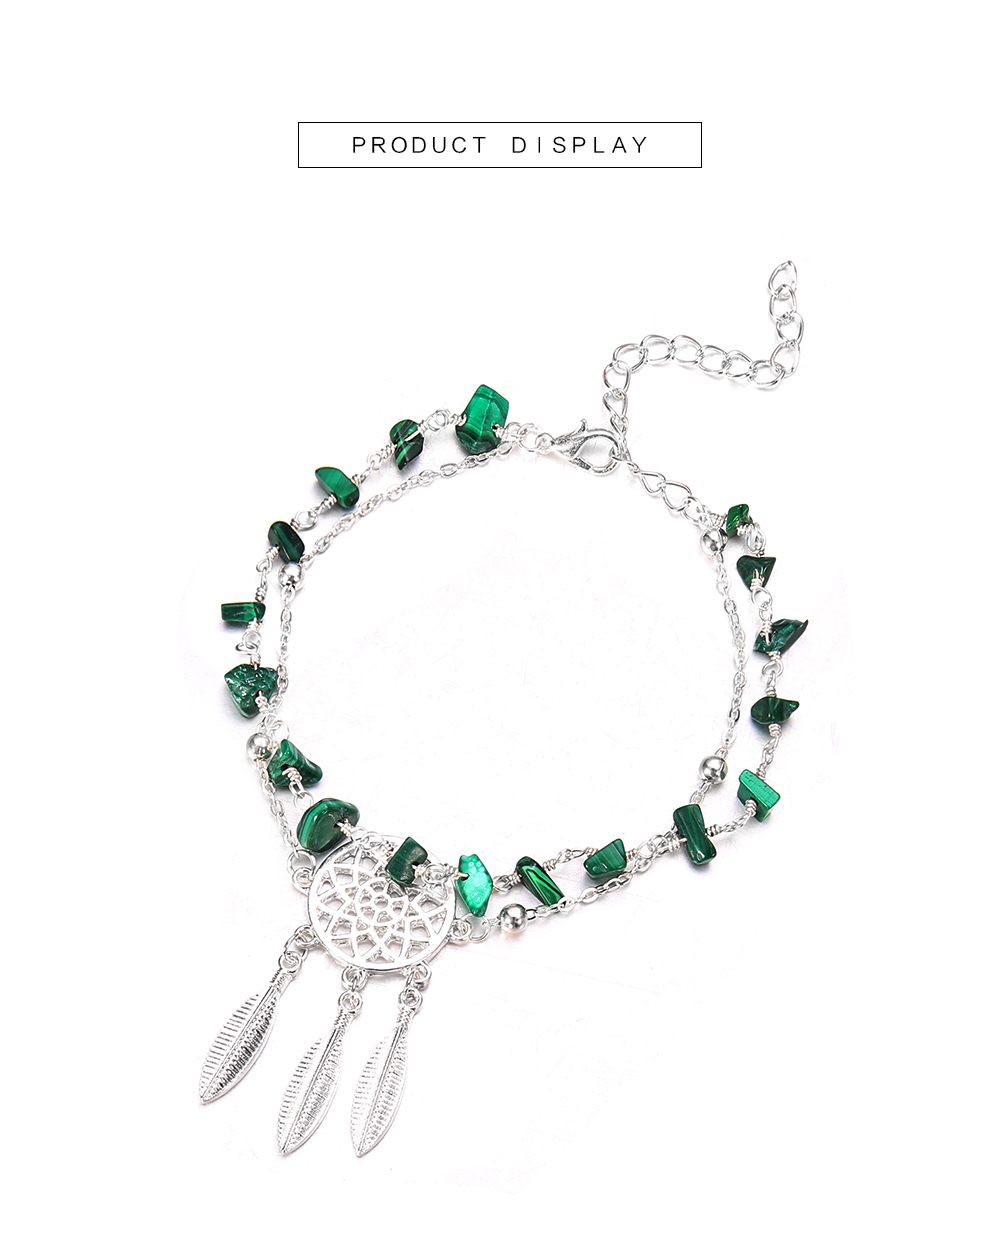 Hollow Dreamcatcher Irregular Turquoise Anklet Feather Pendant